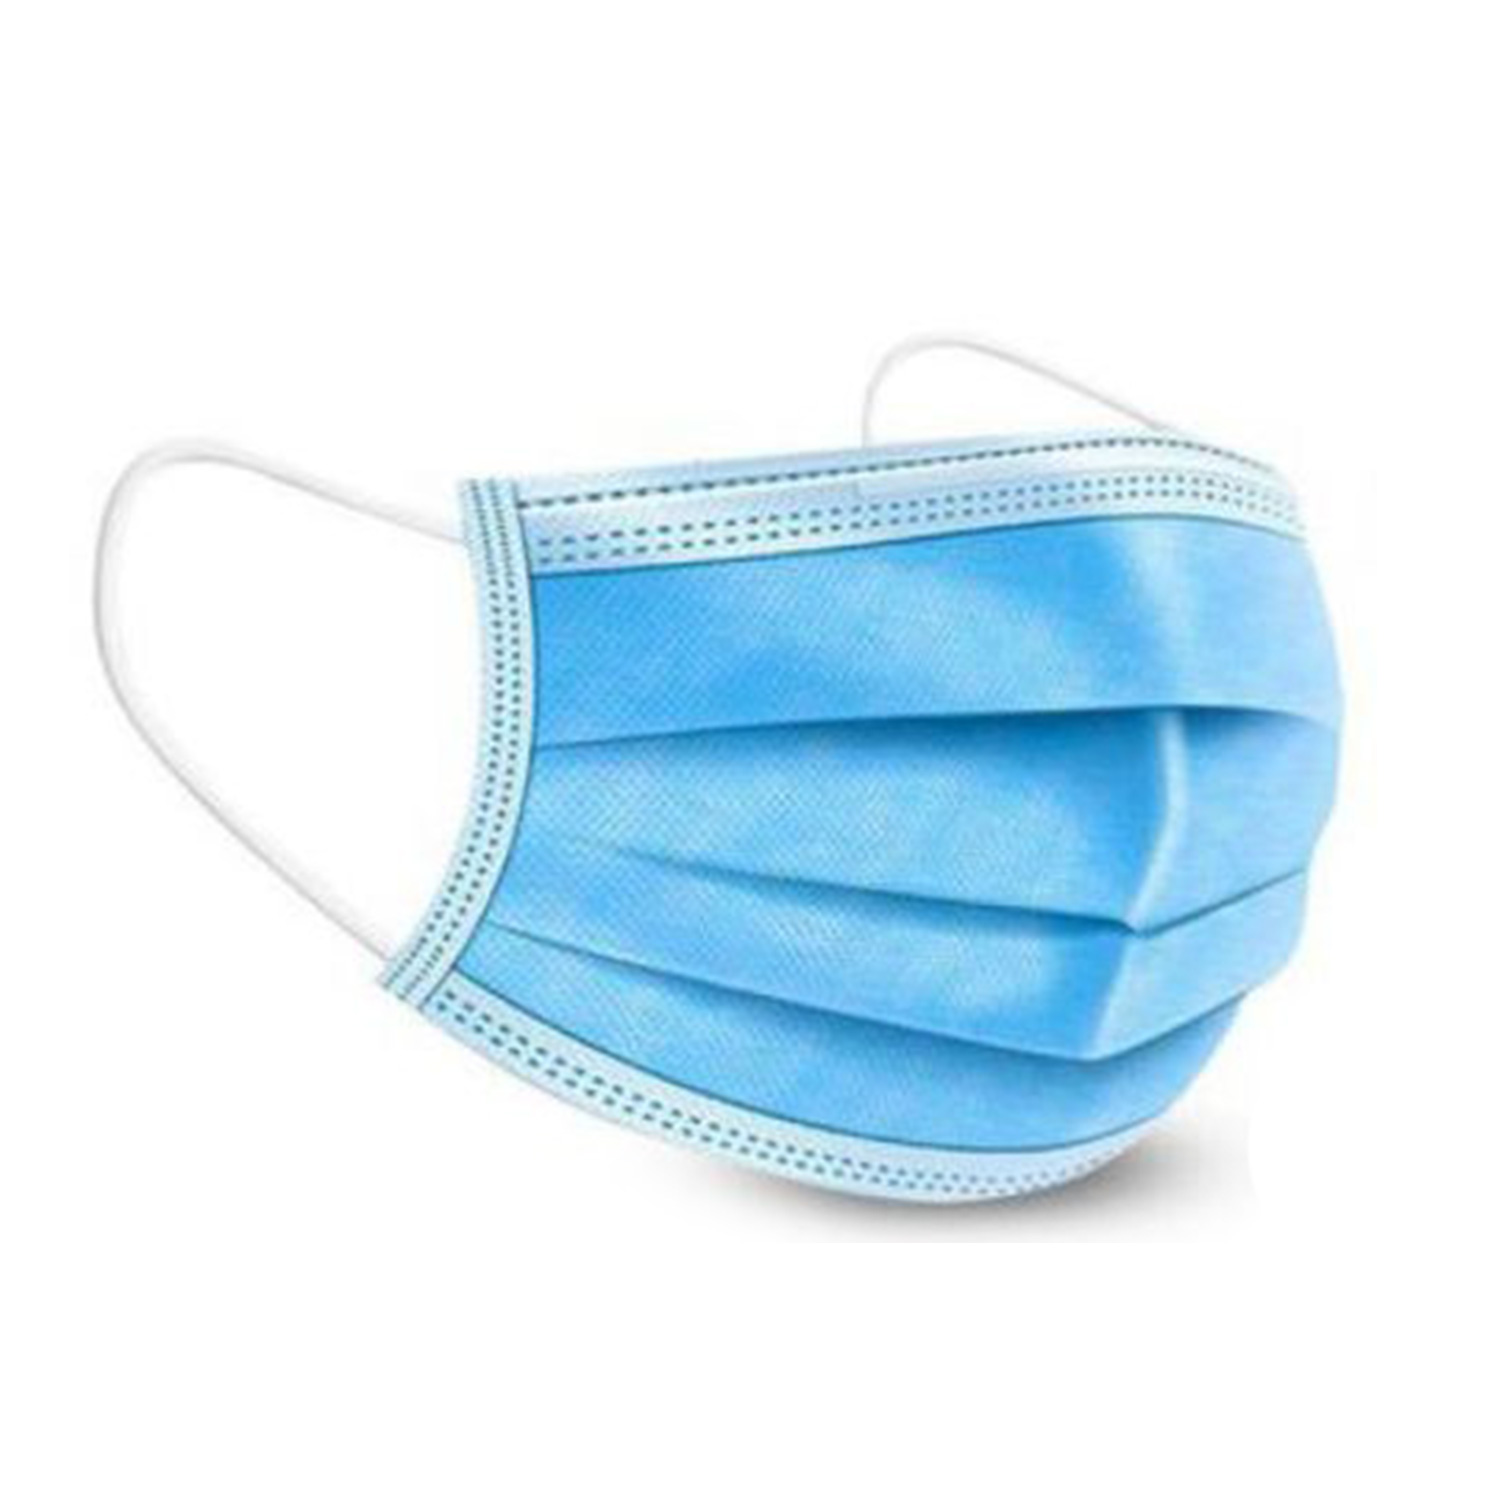 Darling Food Service Disposable Blue 3-Ply Face Mask - 50 / PK - Wasserstrom